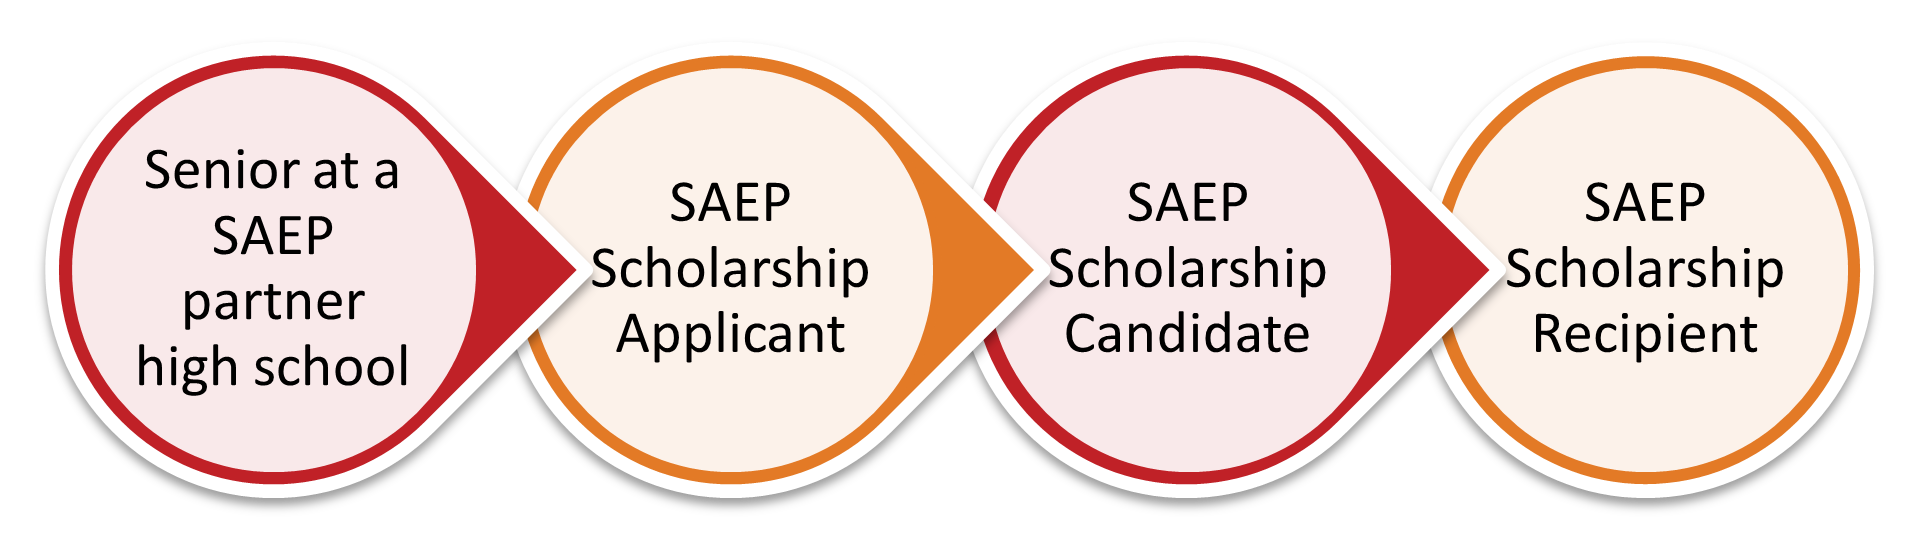 SAEP Scholarship Stages